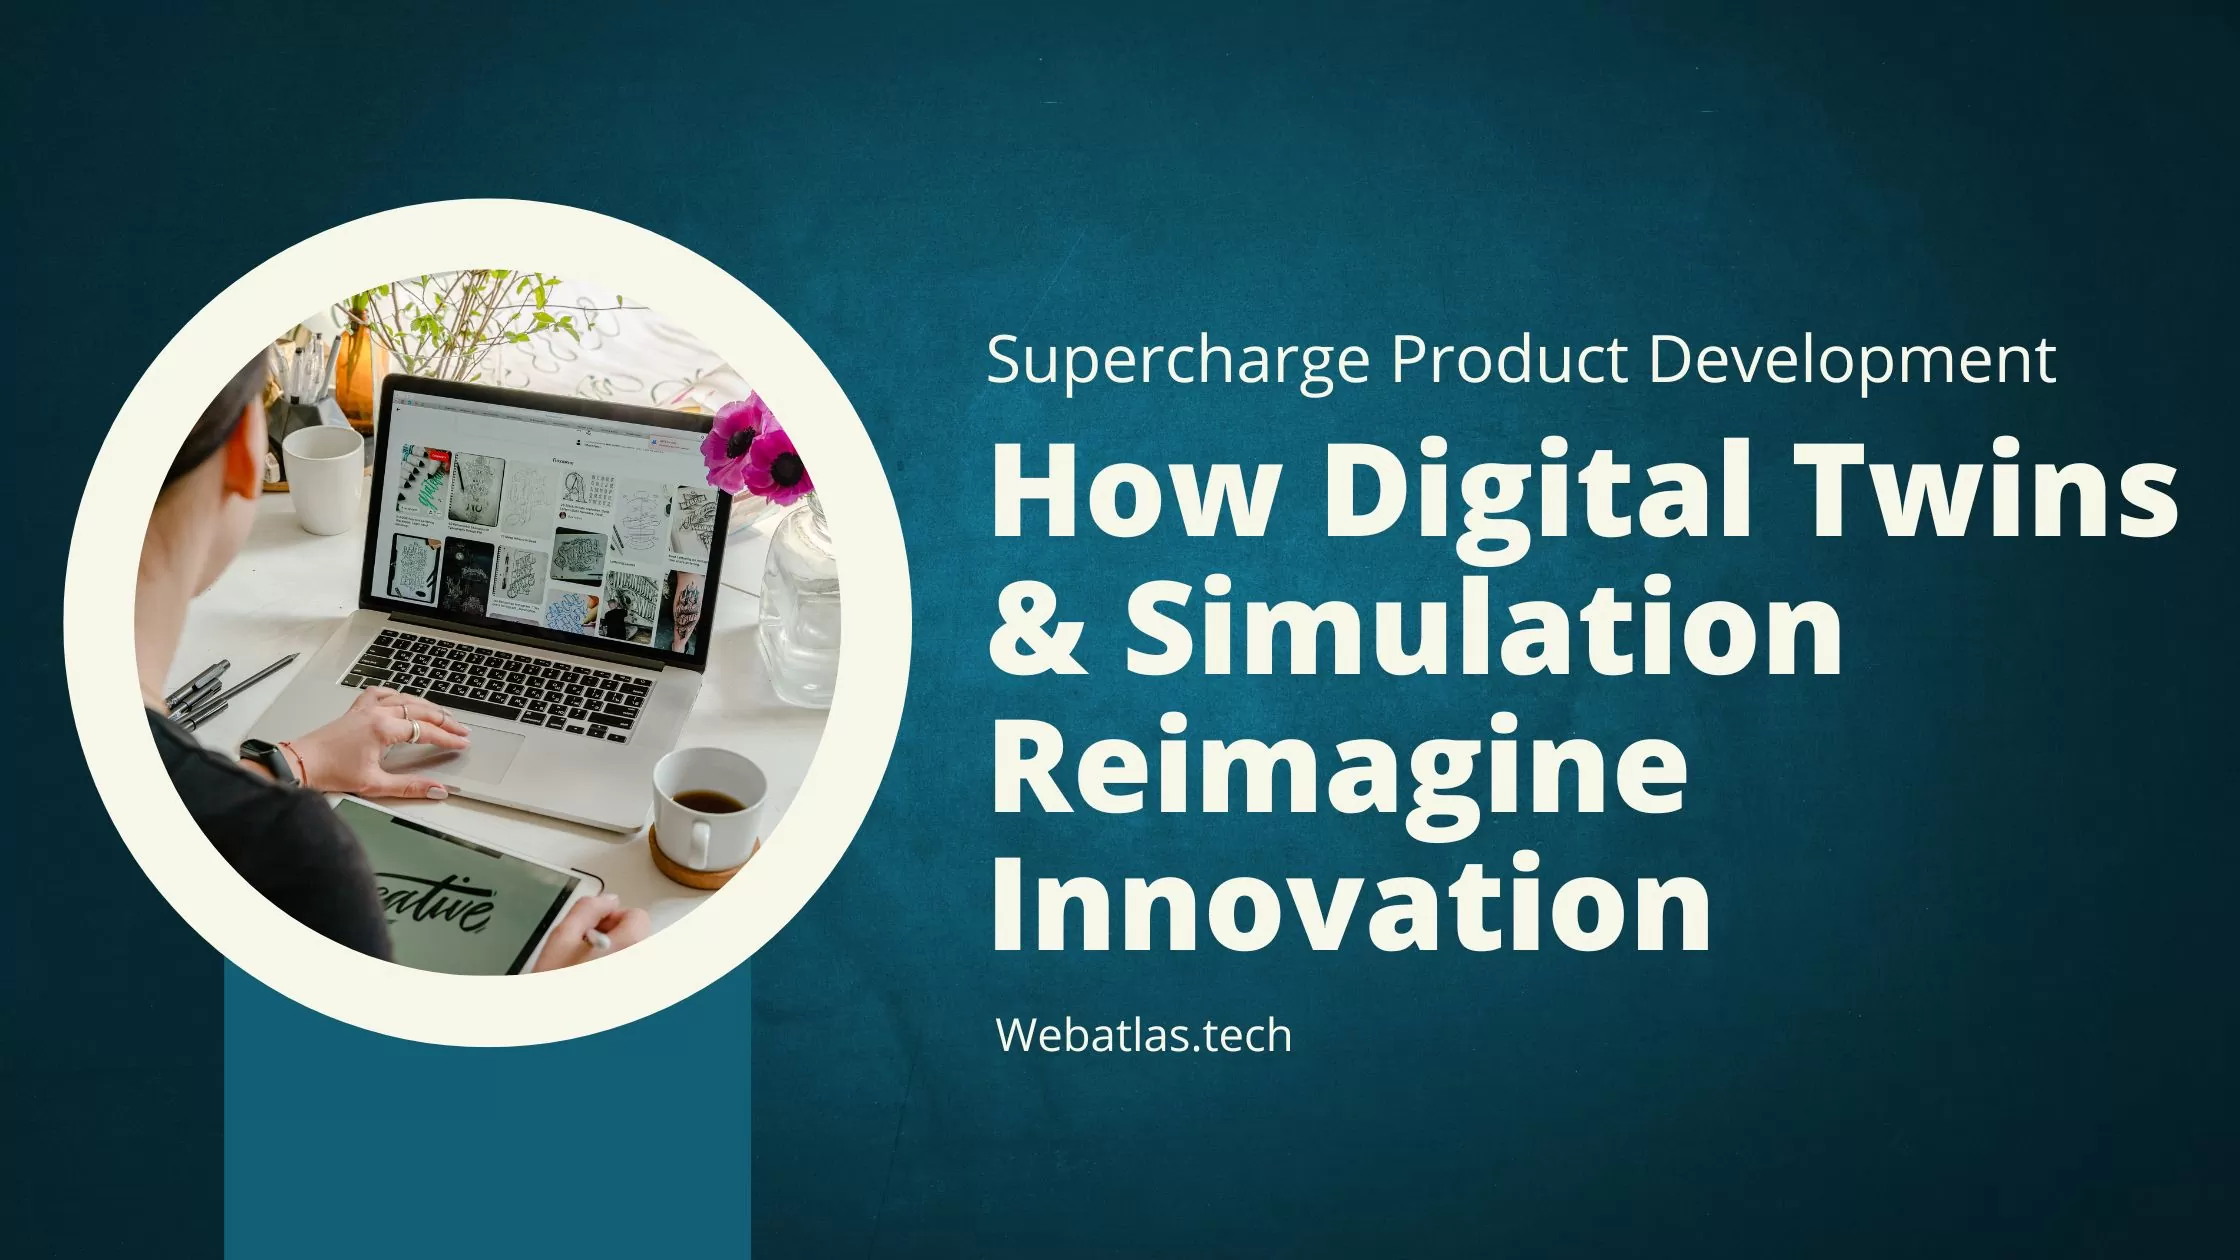 Digital Twins & Simulation: Supercharging Product Development with Virtual Replicas